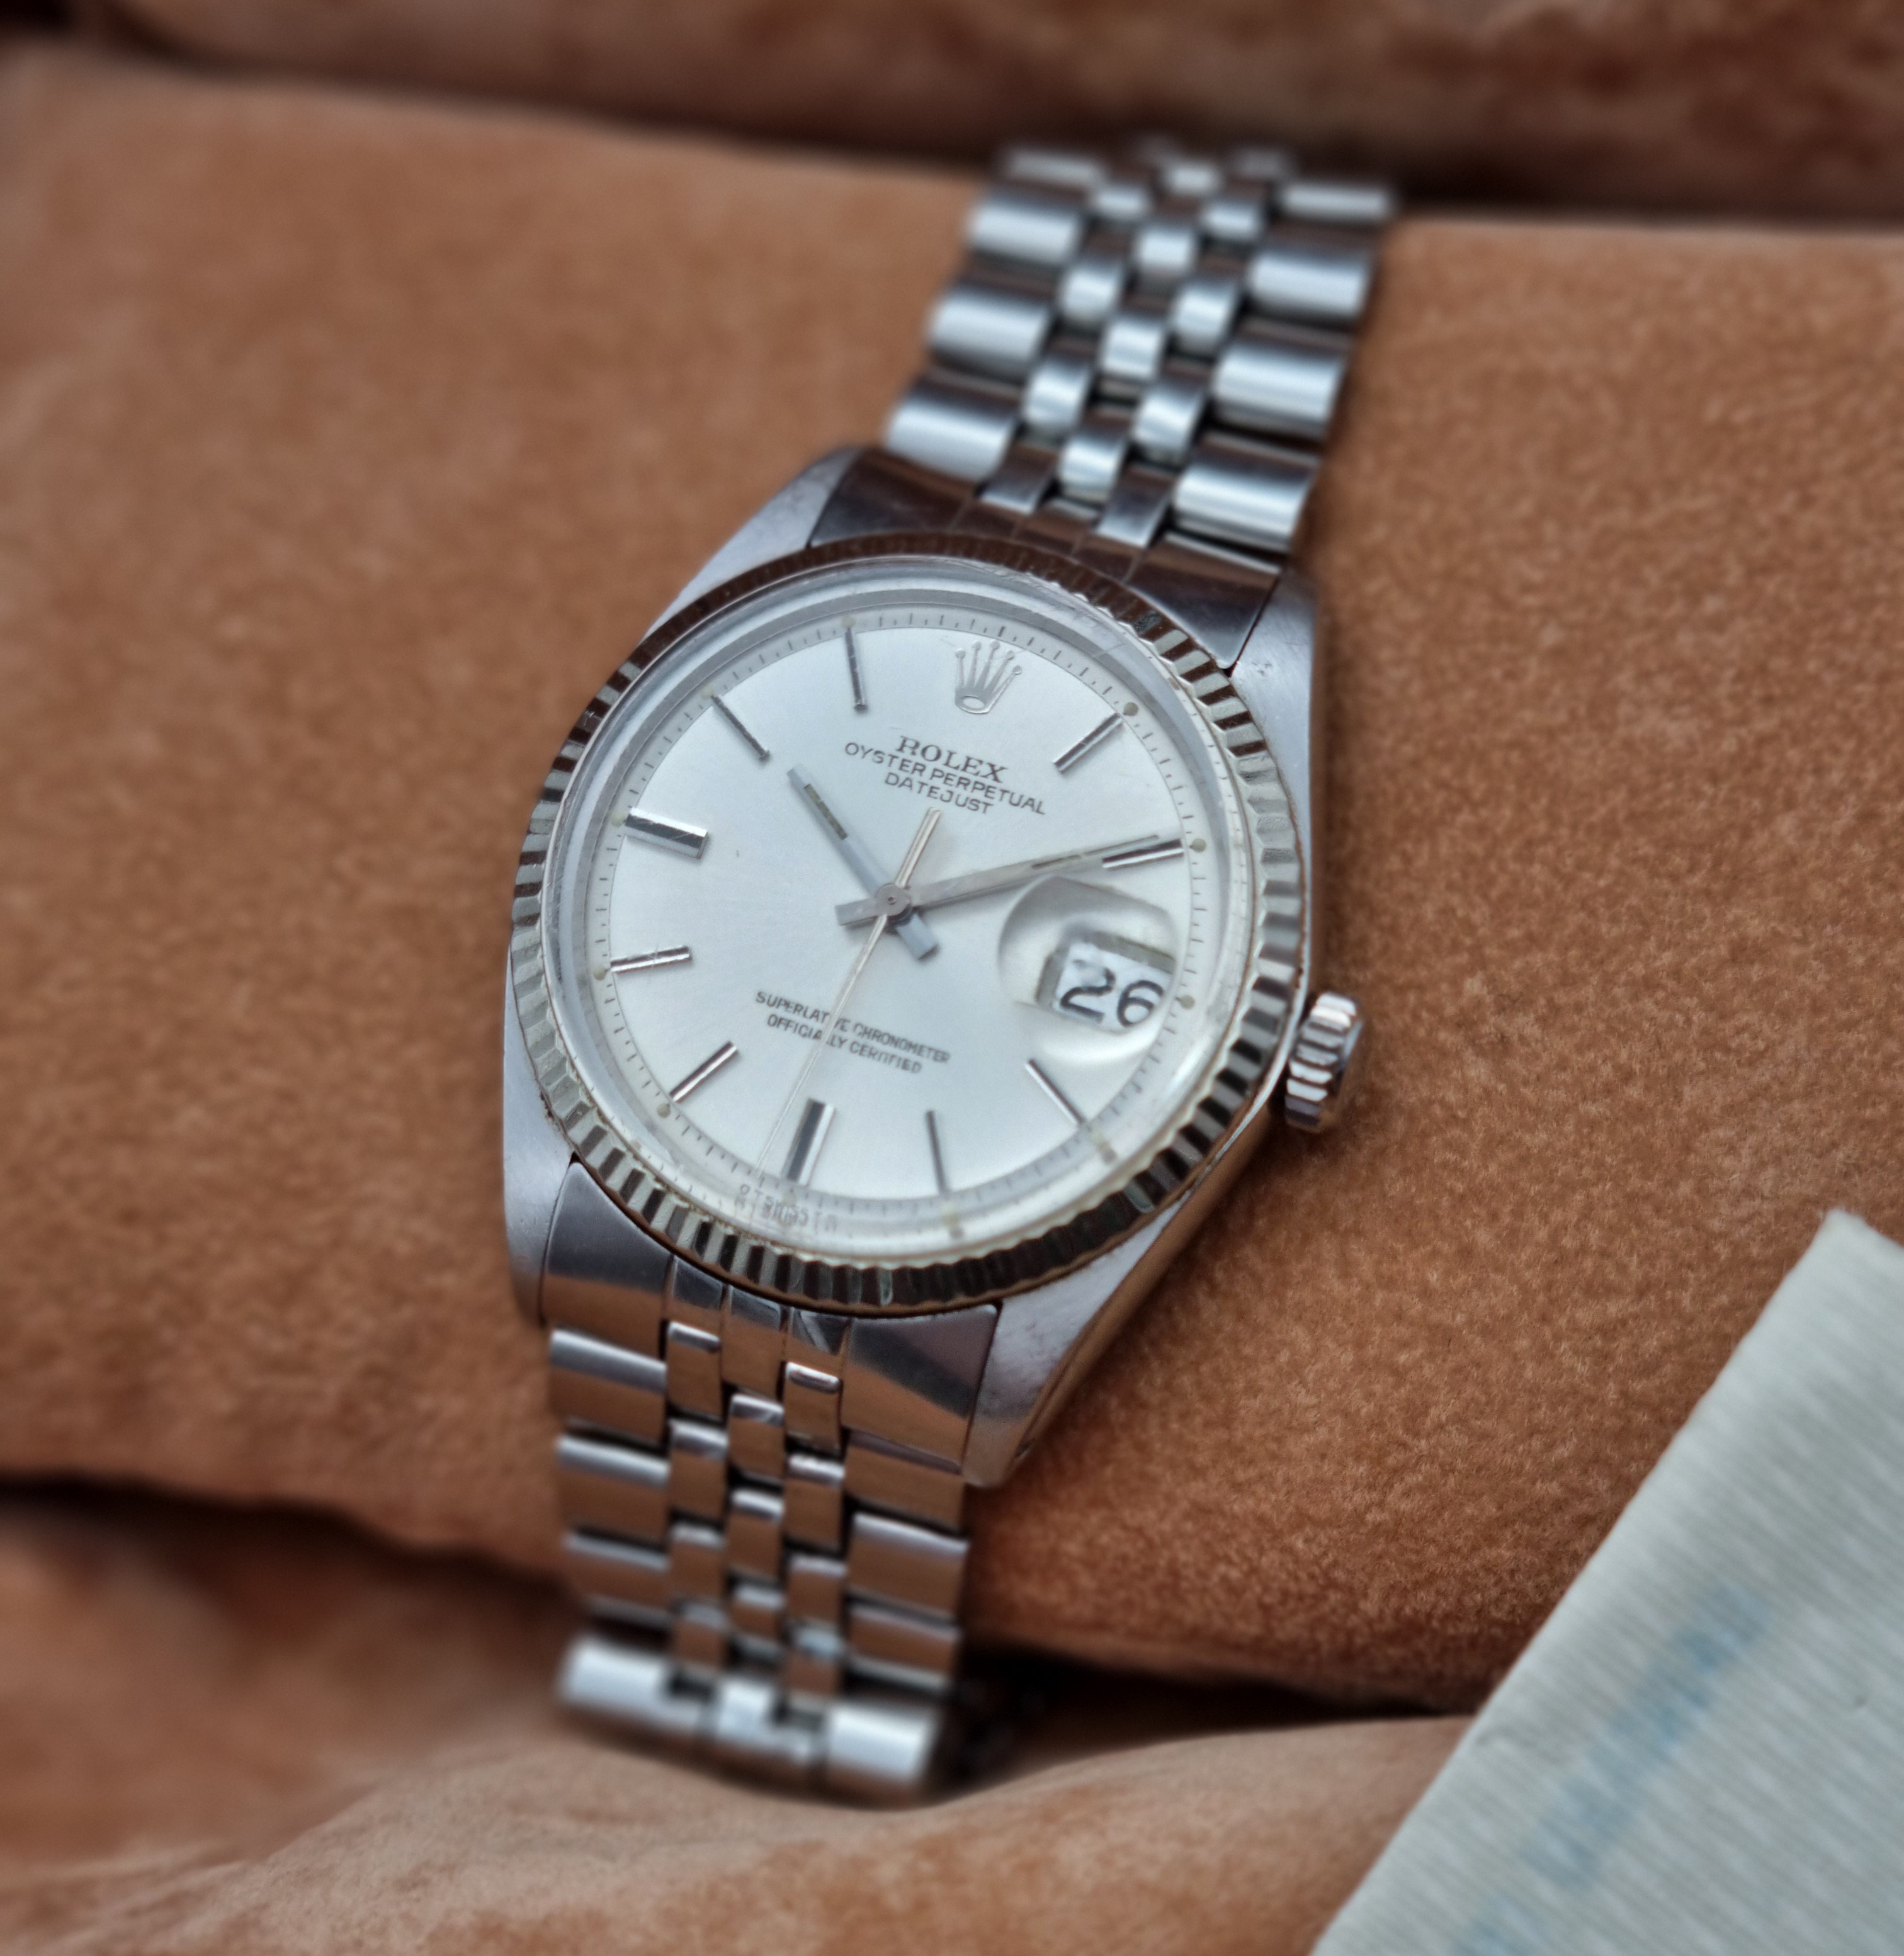 Rolex Datejust Datejust 36 Oyster Perpetual Datejust 36 - Ref. 1601 - Silver Dial - From 1975 - Box And Paper | San Giorgio a Cremano